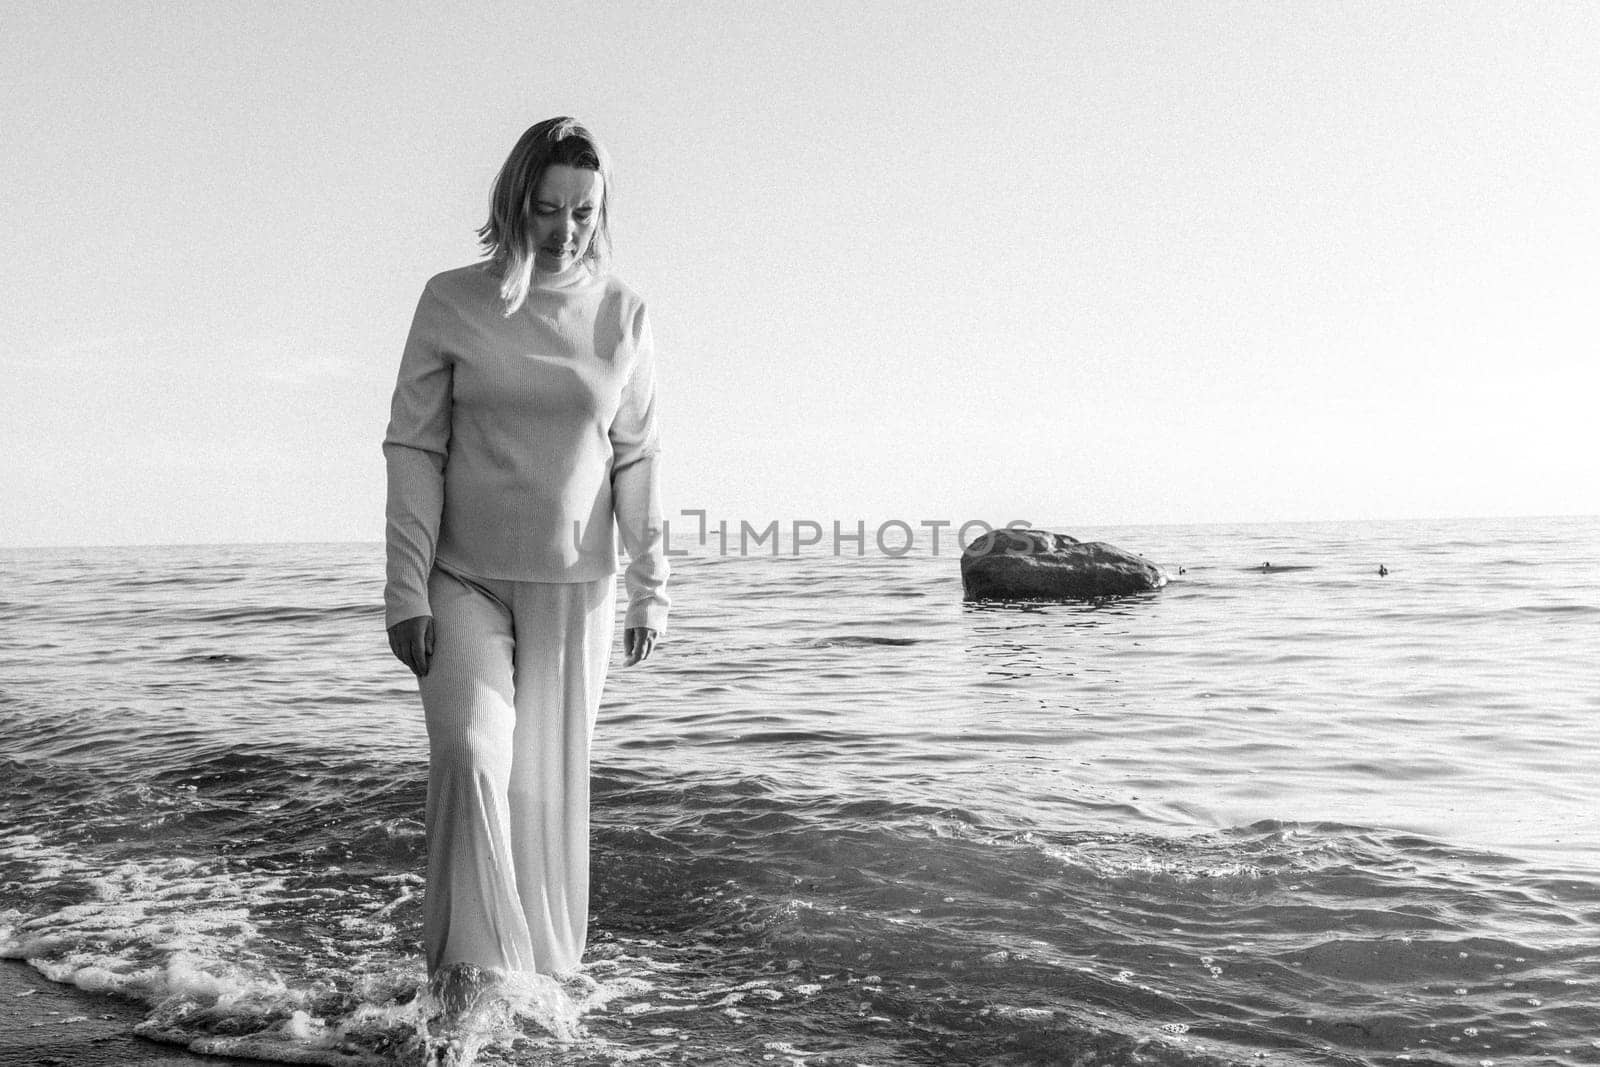 A woman standing waist-deep in the water at a sandy beach, with waves gently splashing around her. Black and white photography.